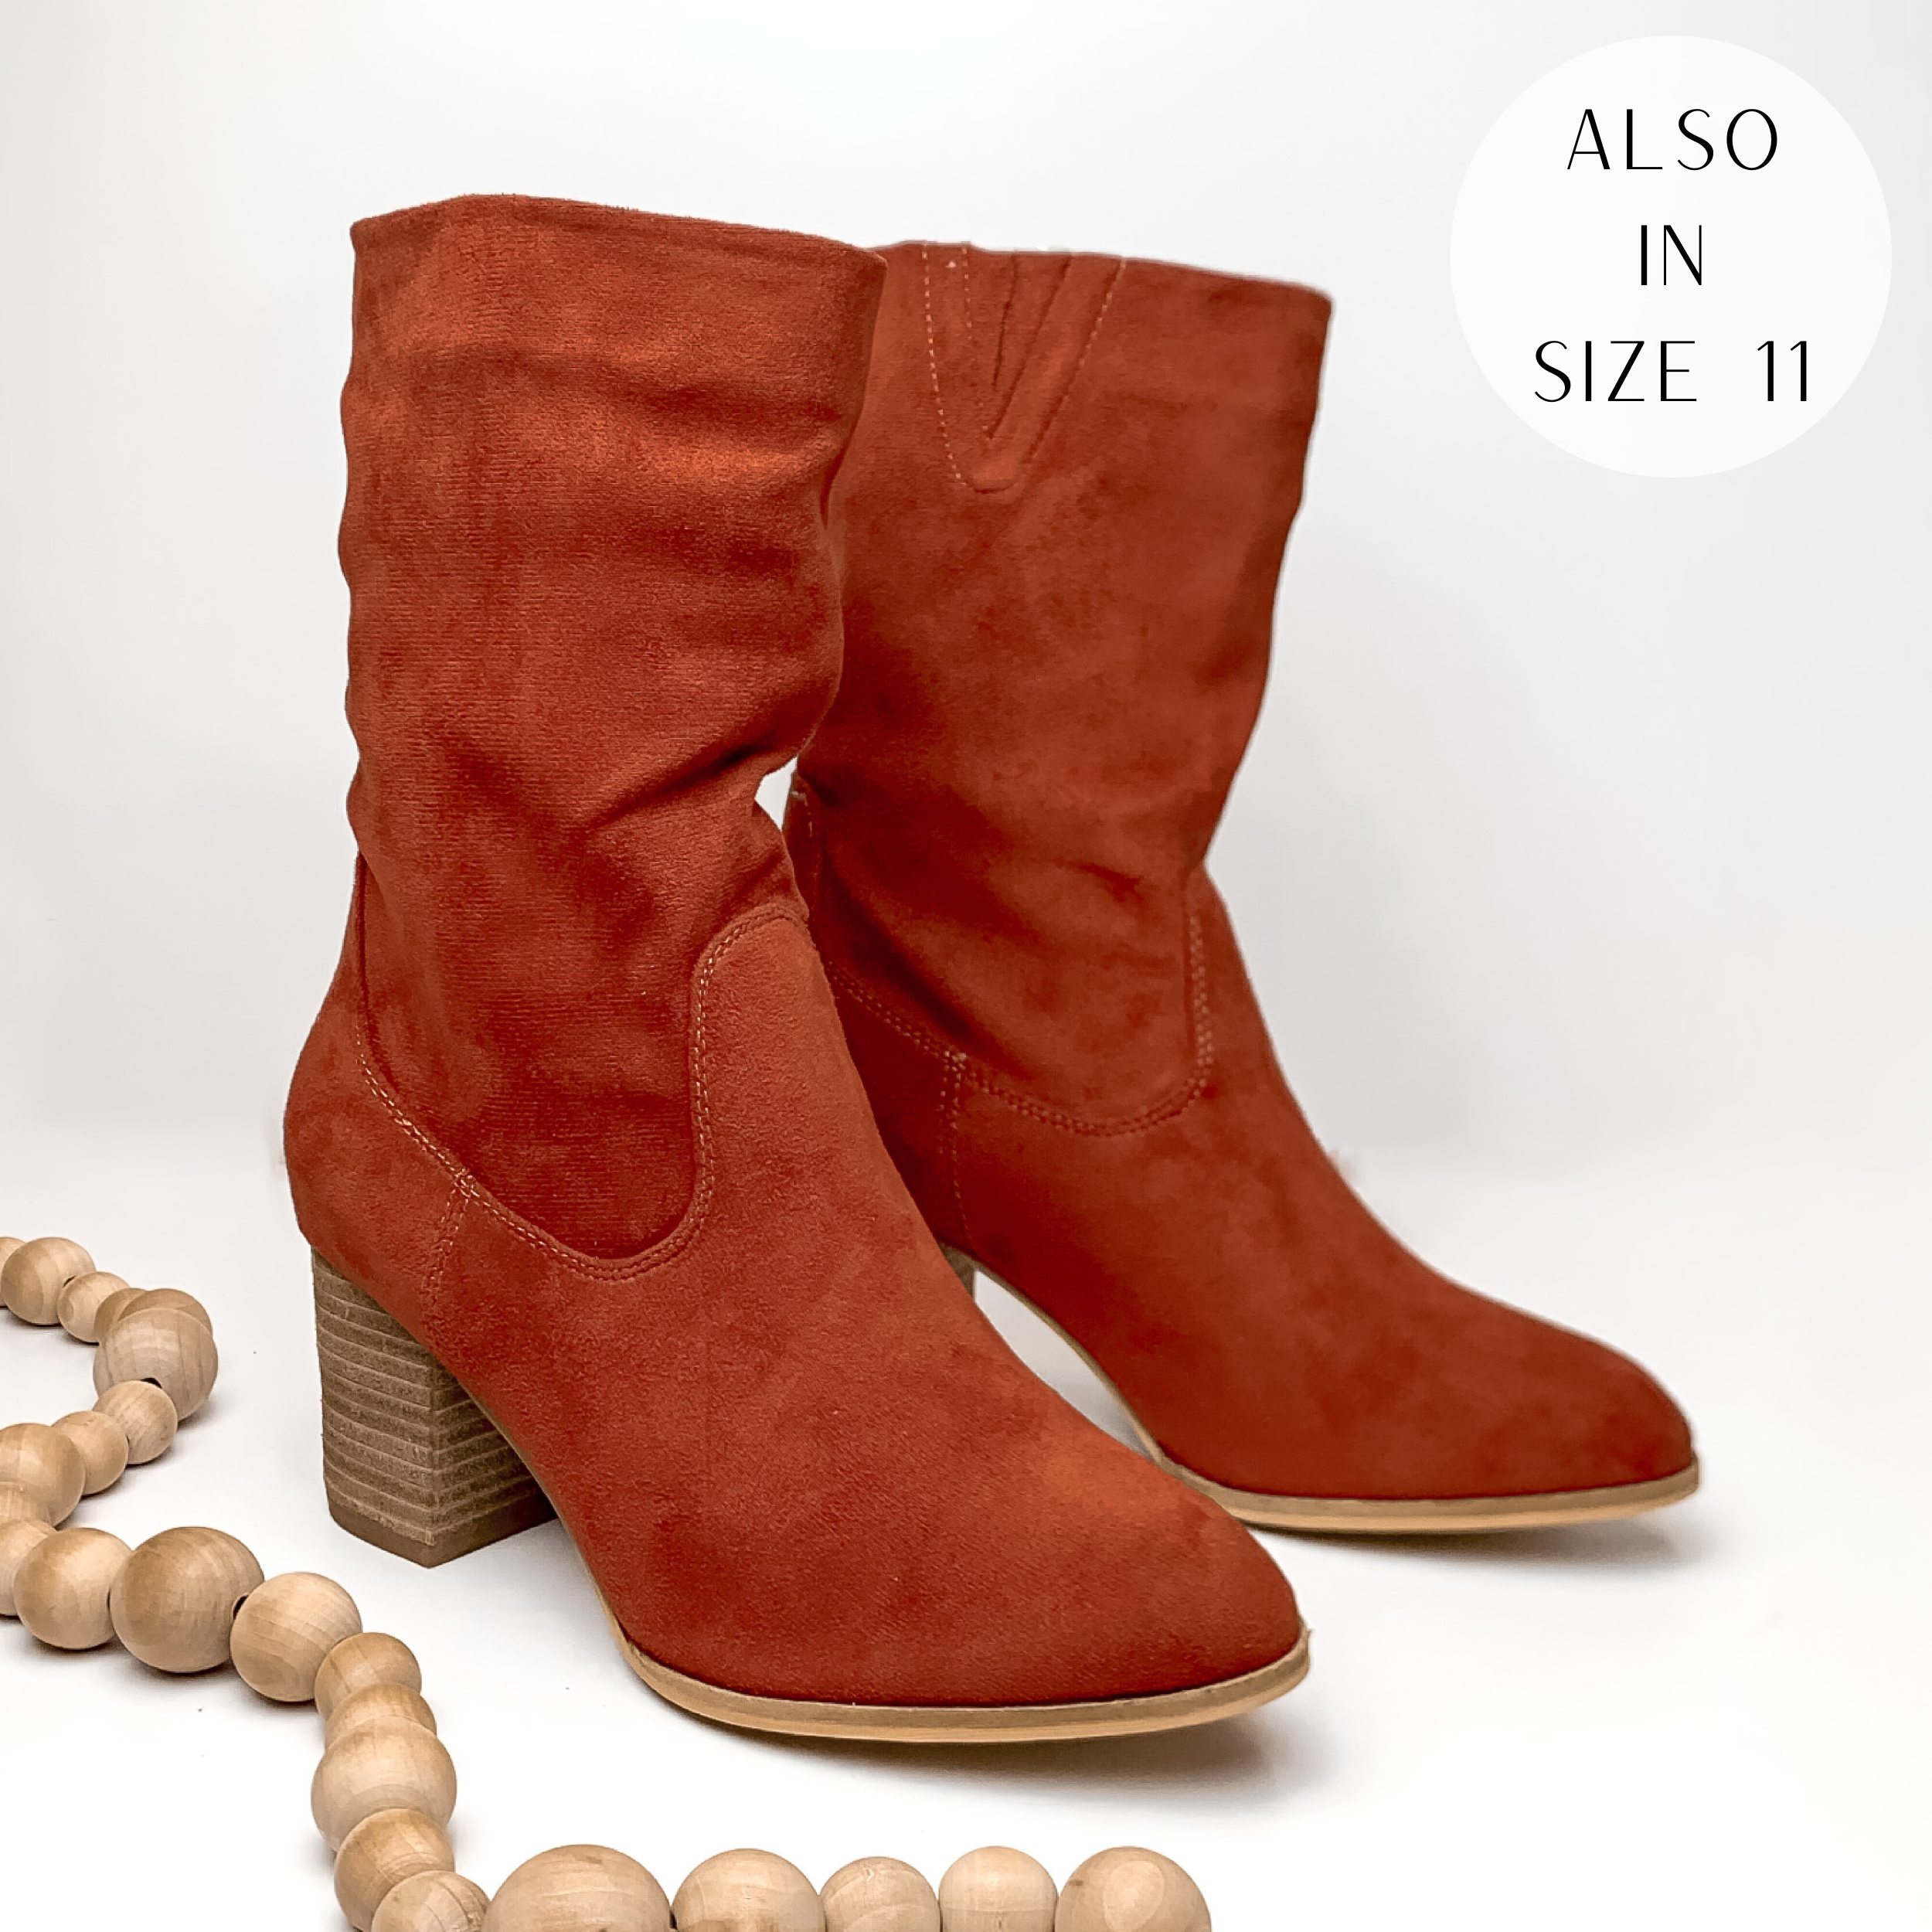 Suede calf booties with heel in rust red. Pictured on white background with light tan beads.